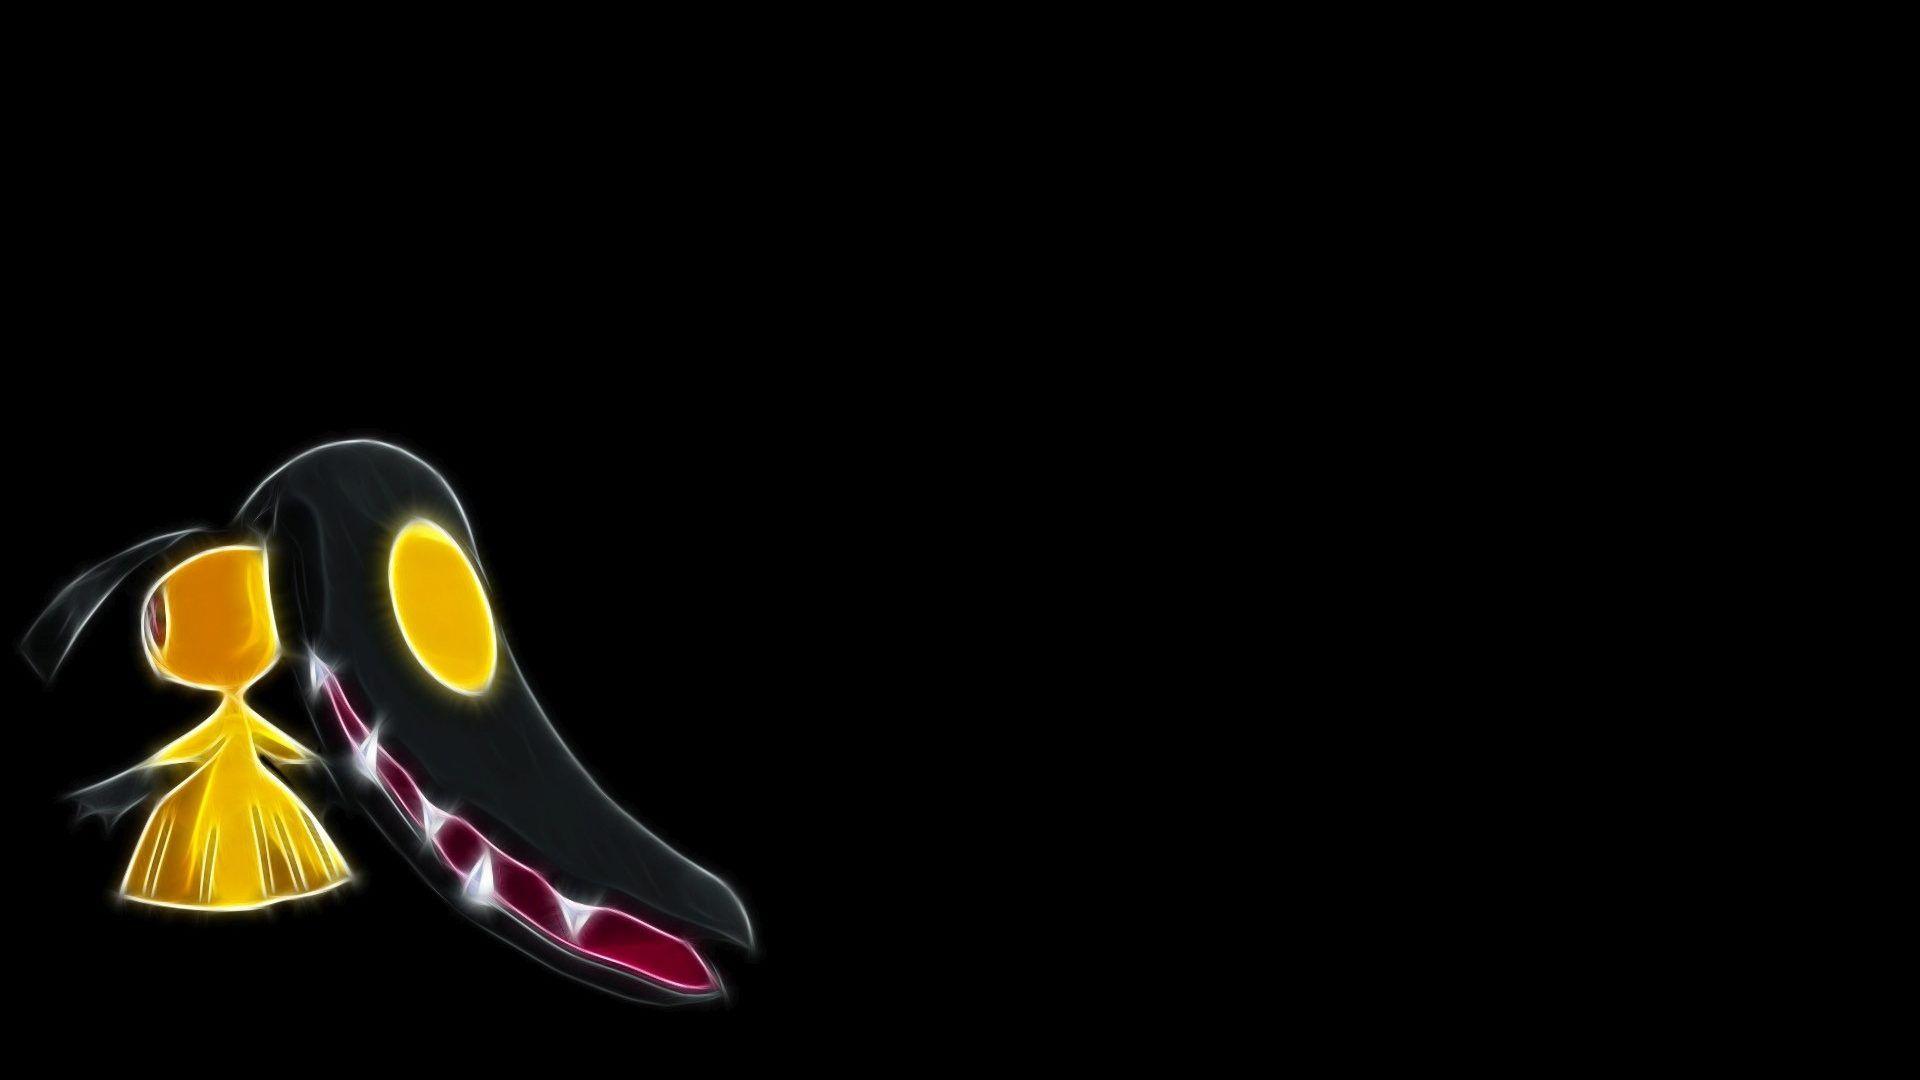 Games: Mawile Pokemon HD Picture 1920x1200 for HD 16:9 High